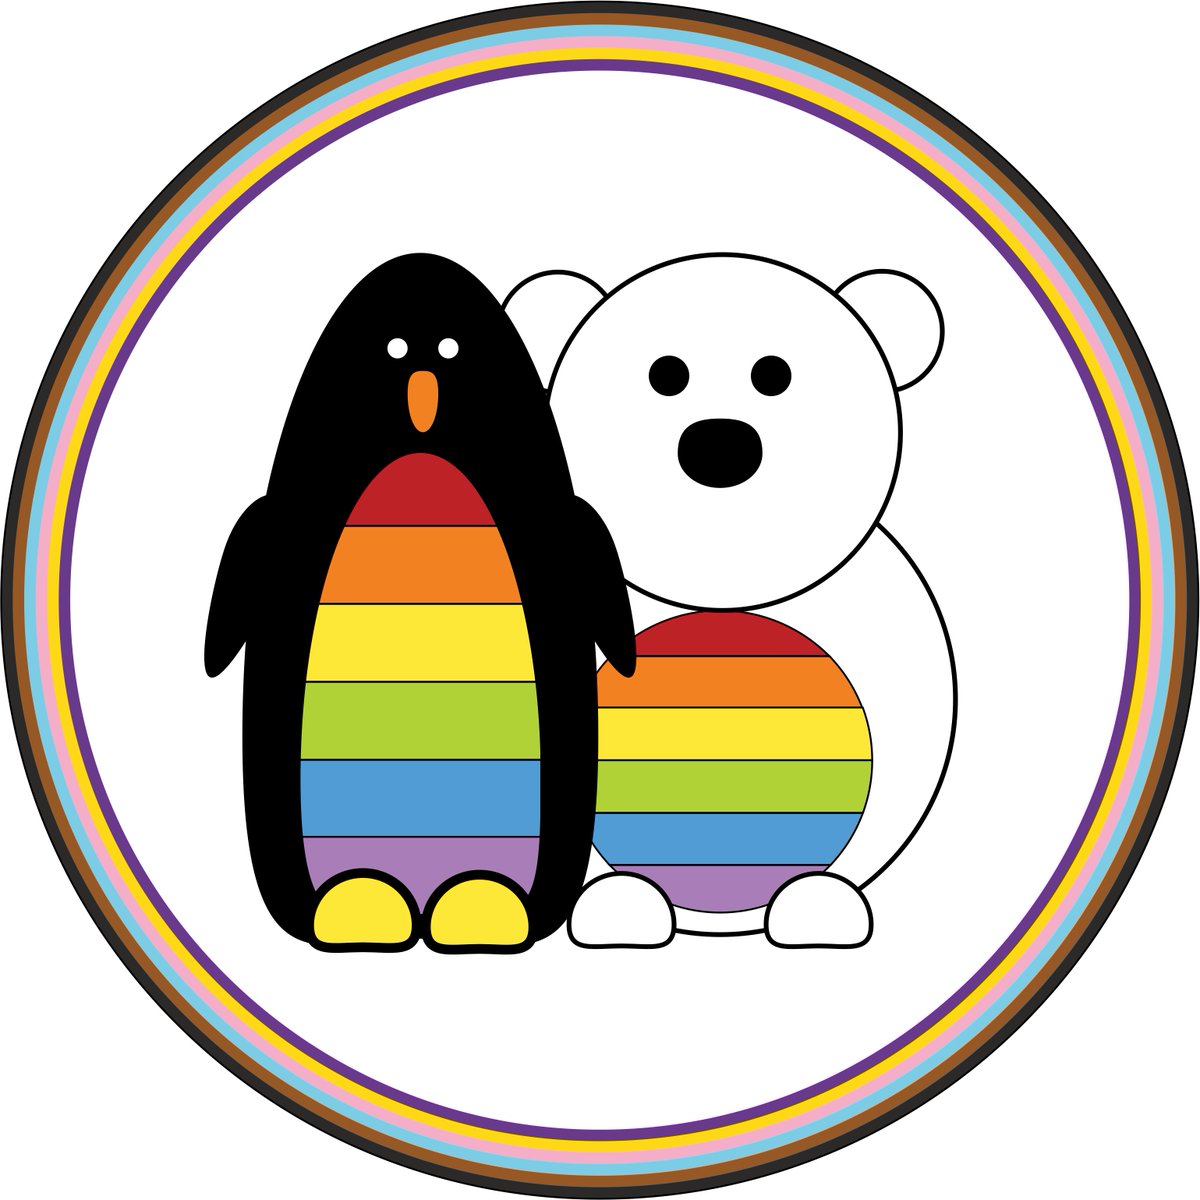 Happy #PolarPrideDay2023 ahead of tomorrow!! 🌈🐧🐻‍❄️❄️

We are really excited to see how everyone who is celebrating today and tomorrow comes together to discuss how #diversity in #PolarScience makes our science better. (1/2)